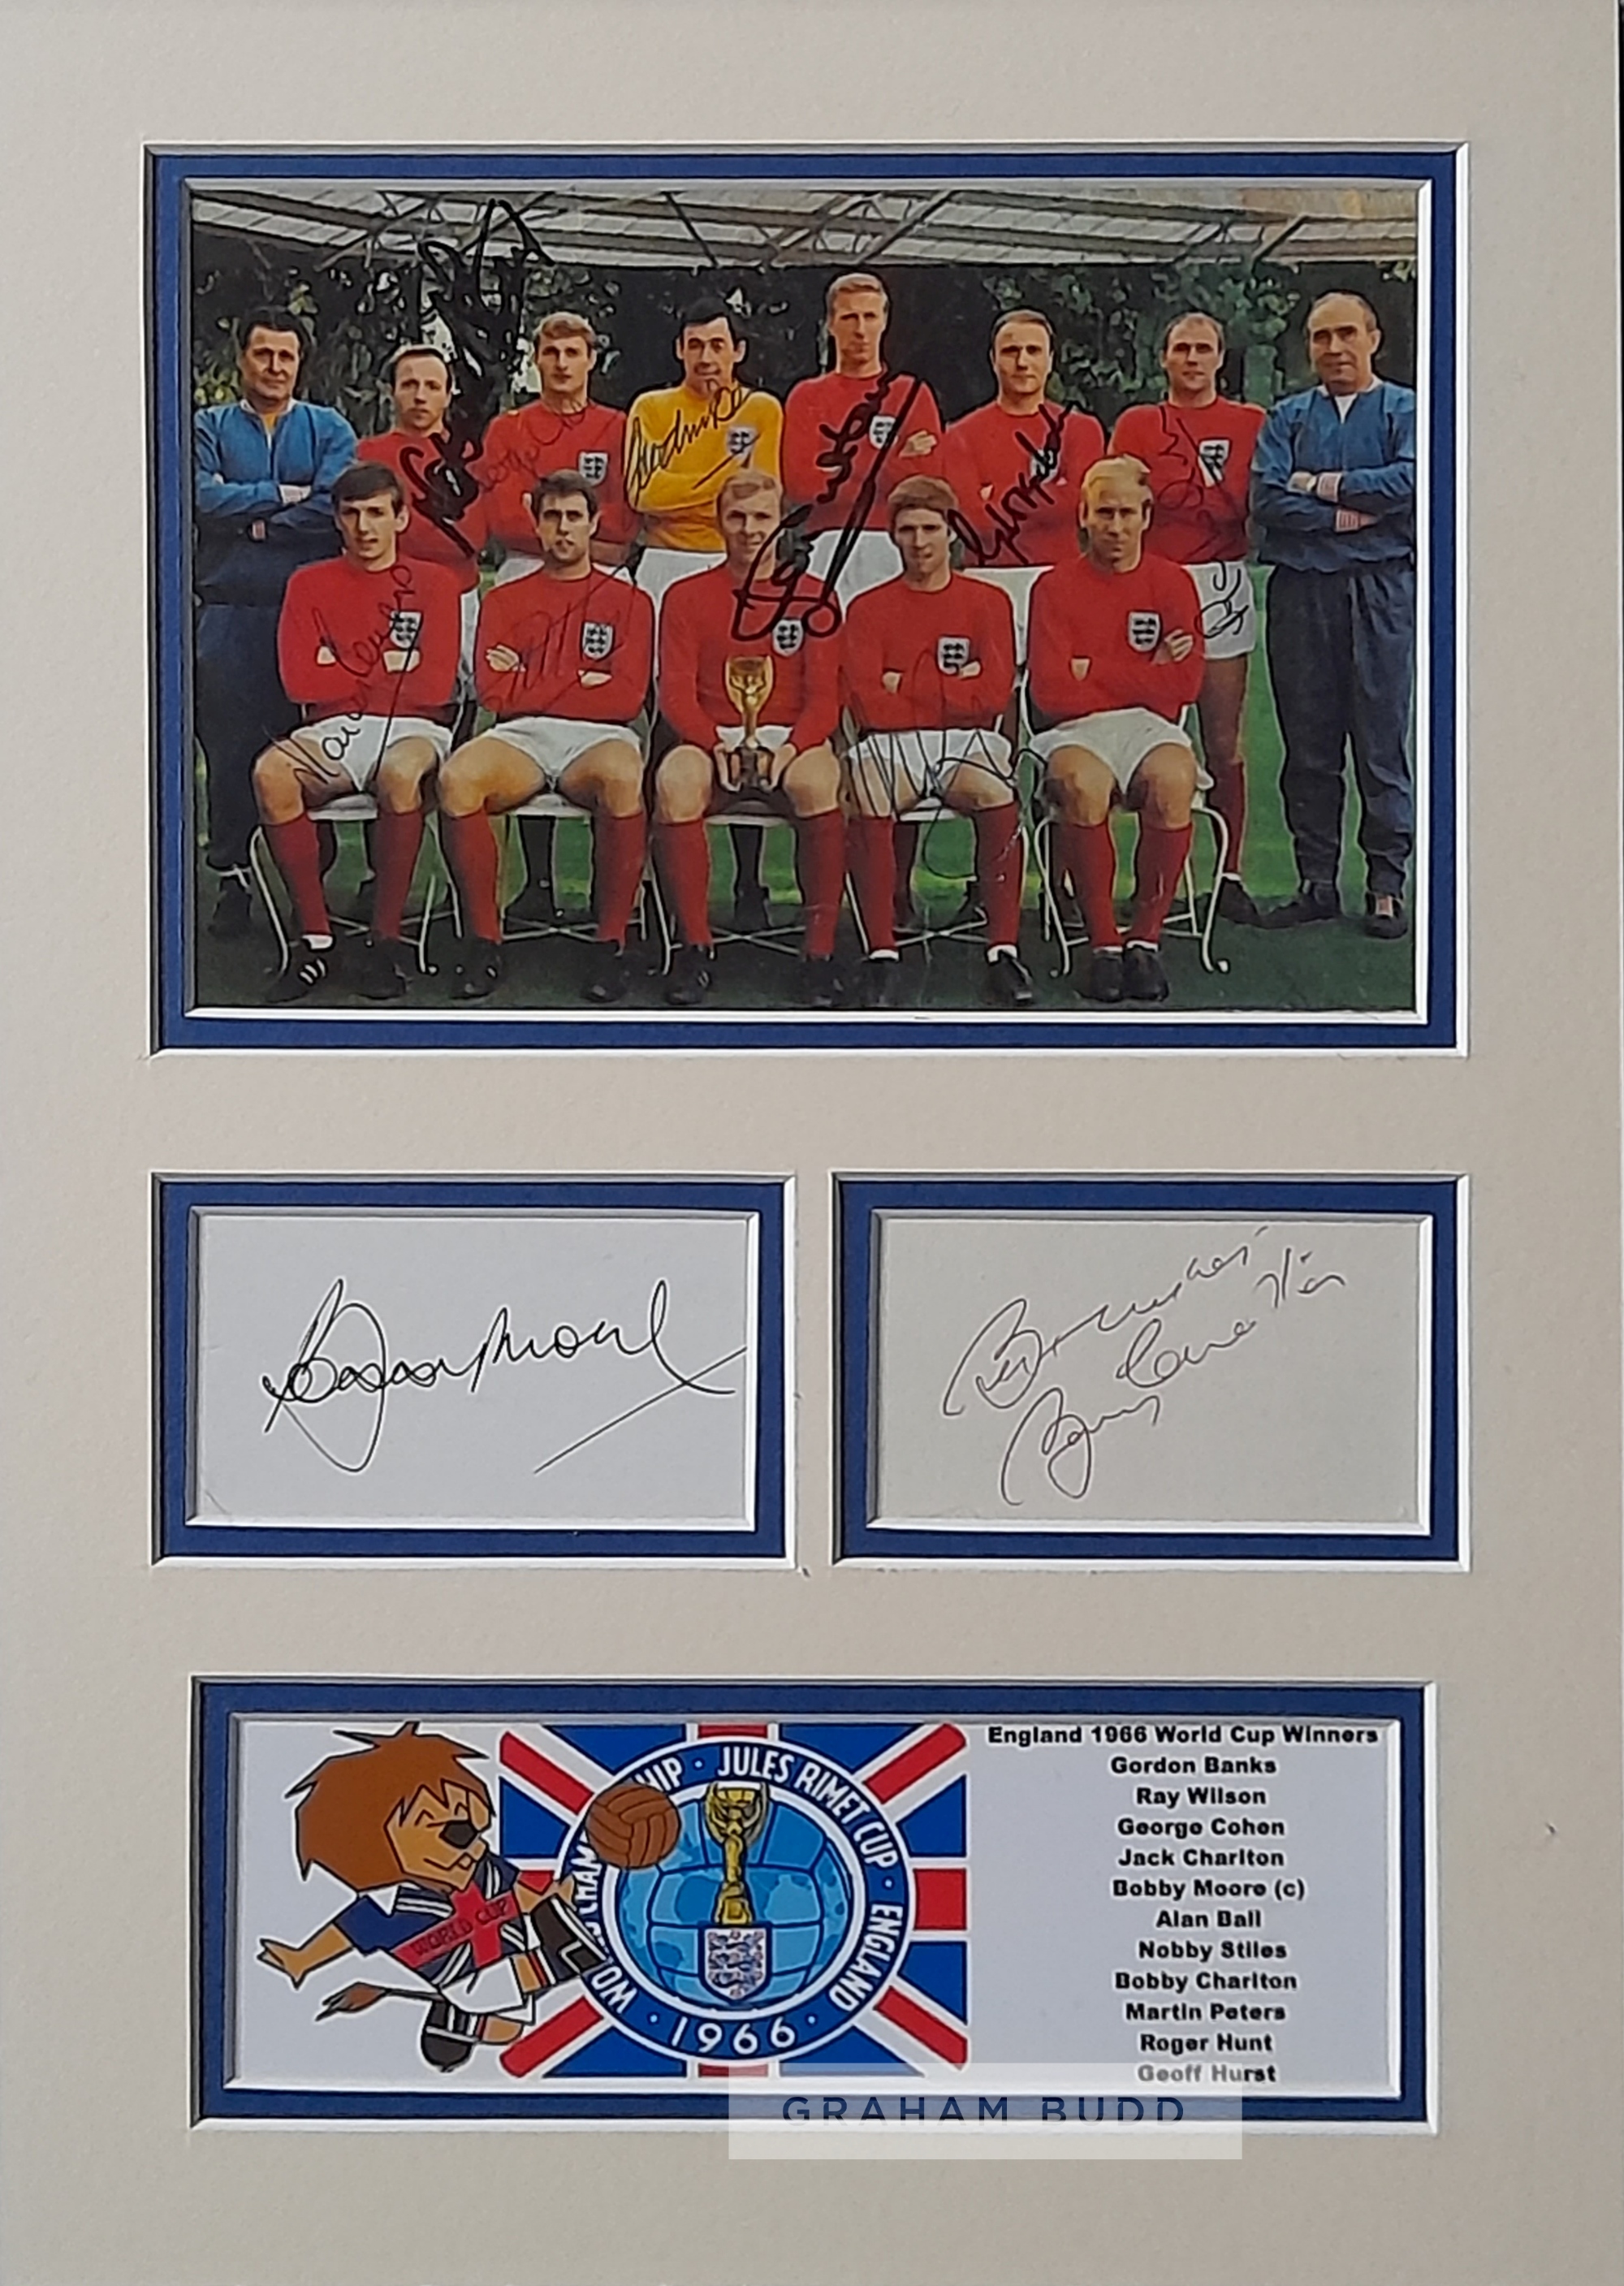 England 1966 World Cup winners mounted display, features team photo hand signed by  Alan Ball, Geoff